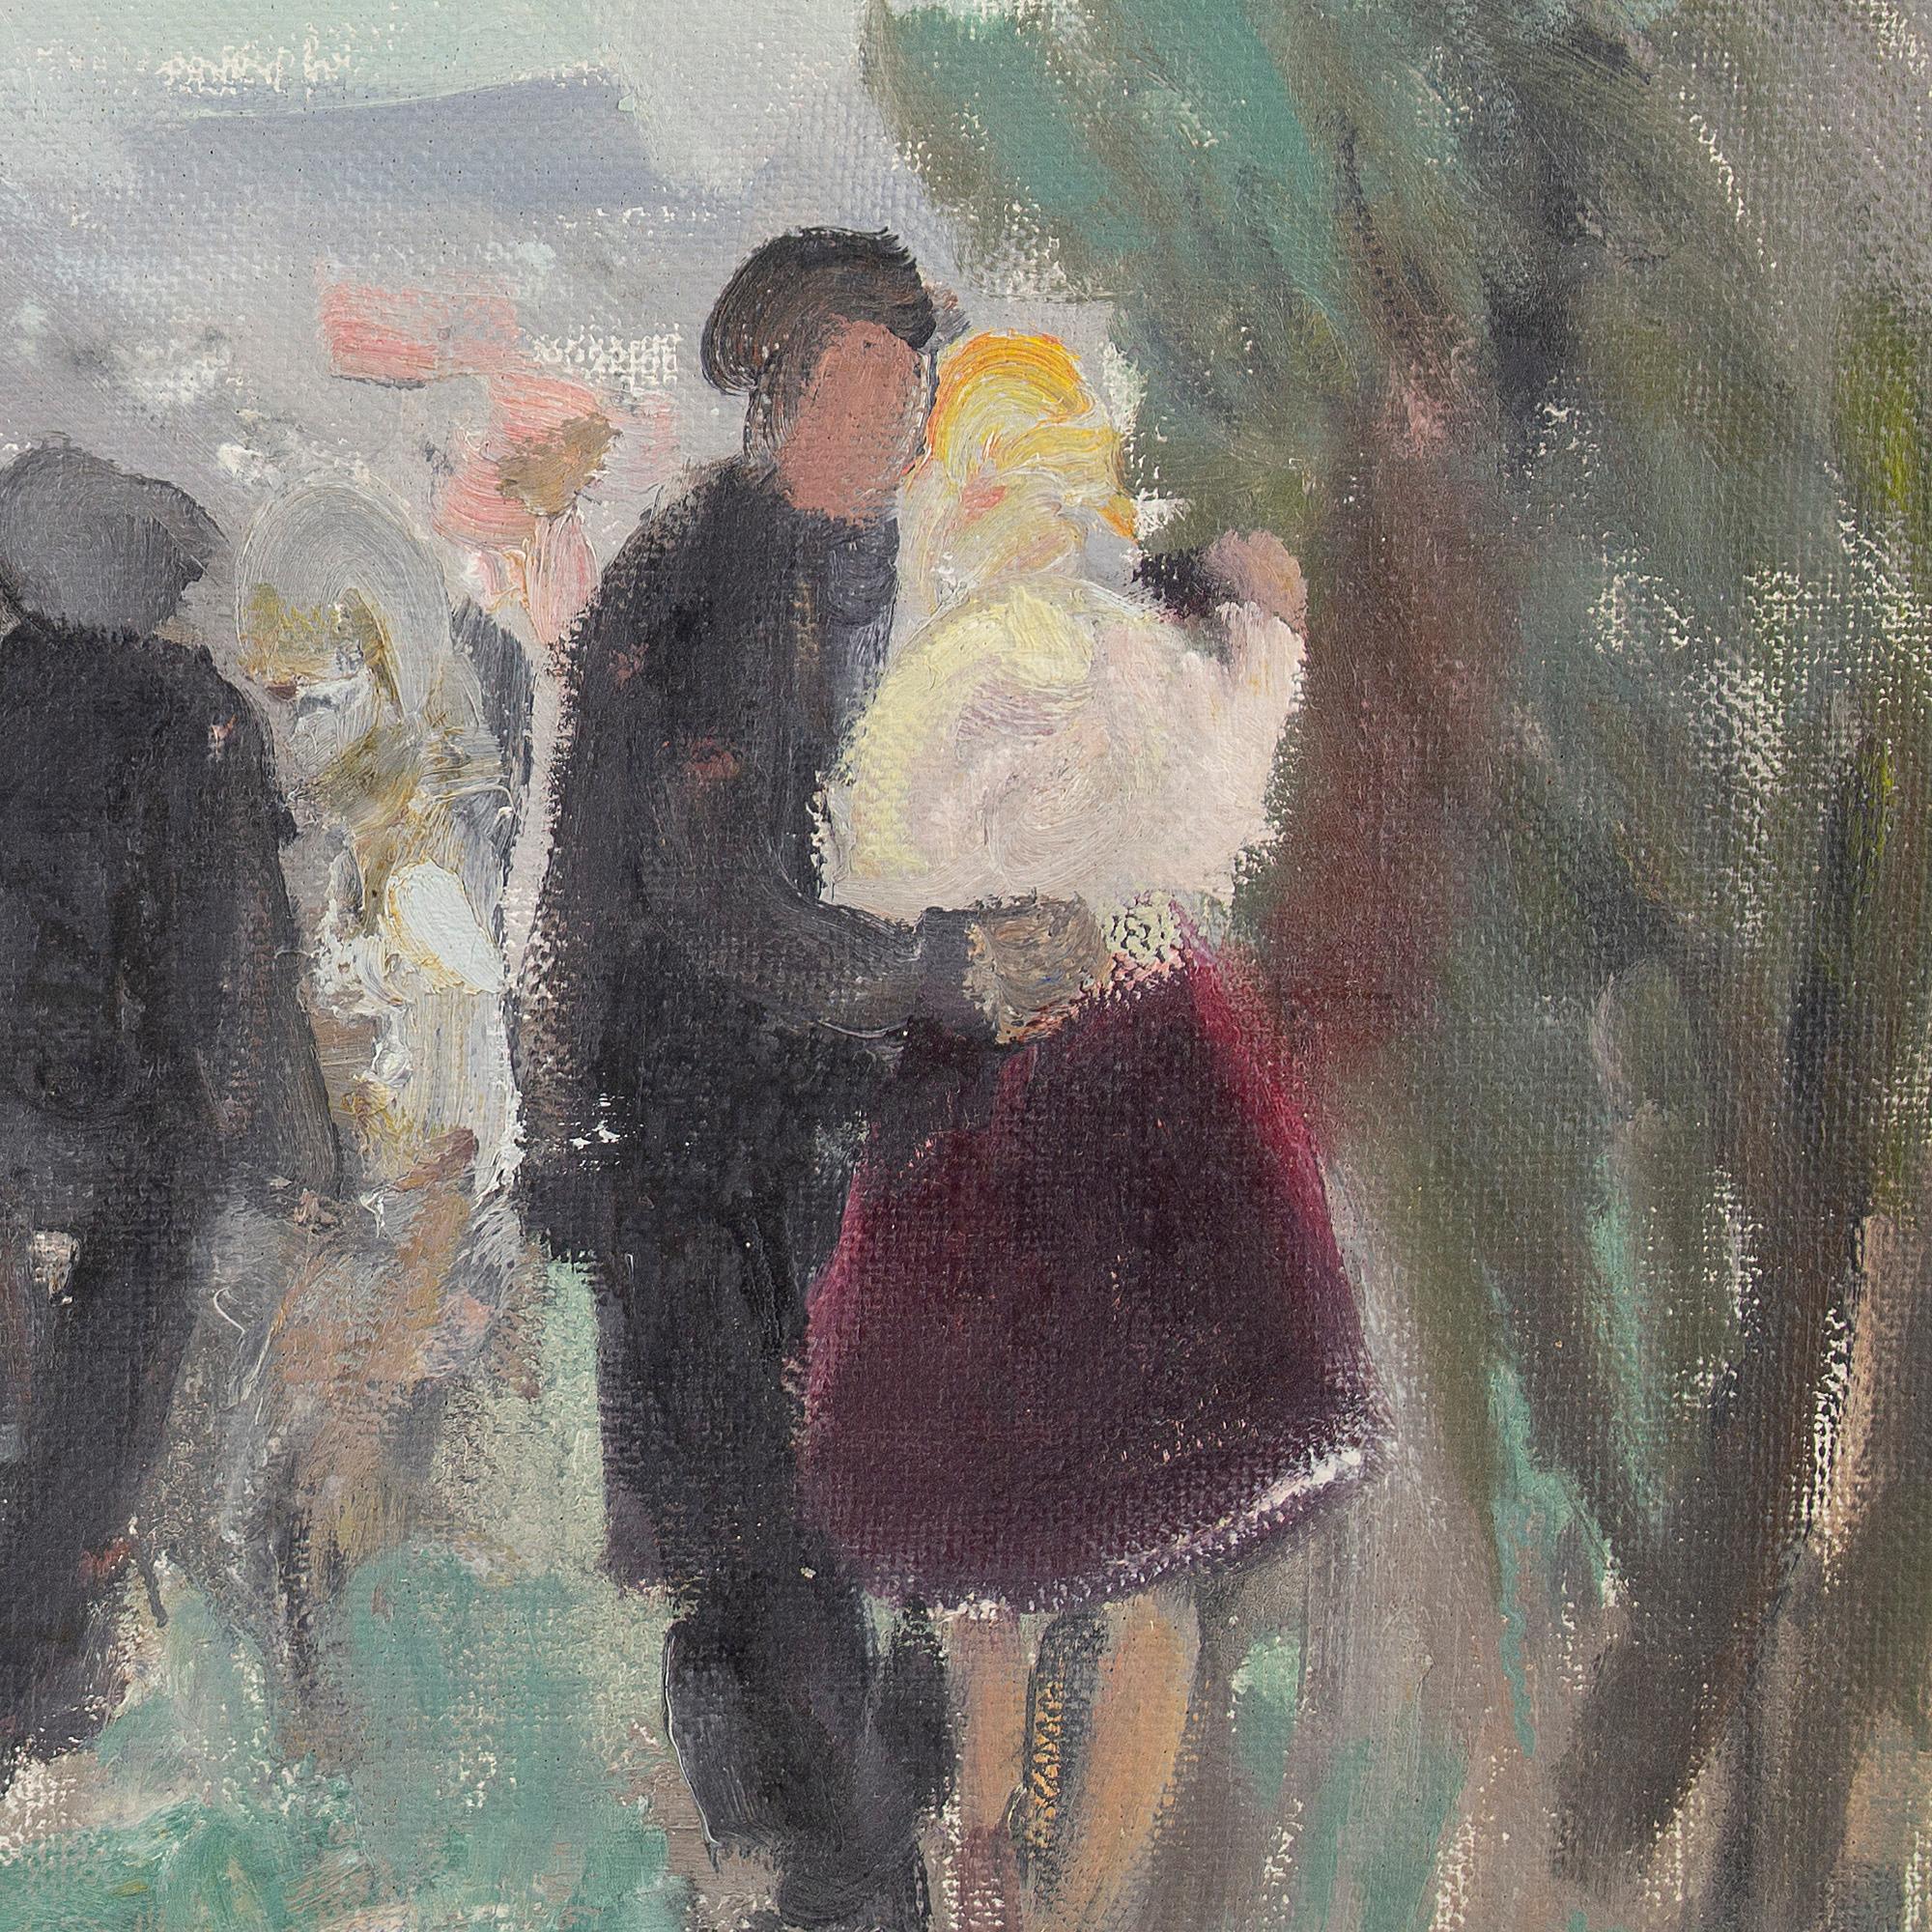 This lively 20th-century oil on canvas by Swedish artist Ake Wickstrom (b.1927) depicts a group of couples dancing outdoors. Oh to be there, throwing caution to the wind and waltzing away on the grass.

Wickstrom rarely takes himself too seriously